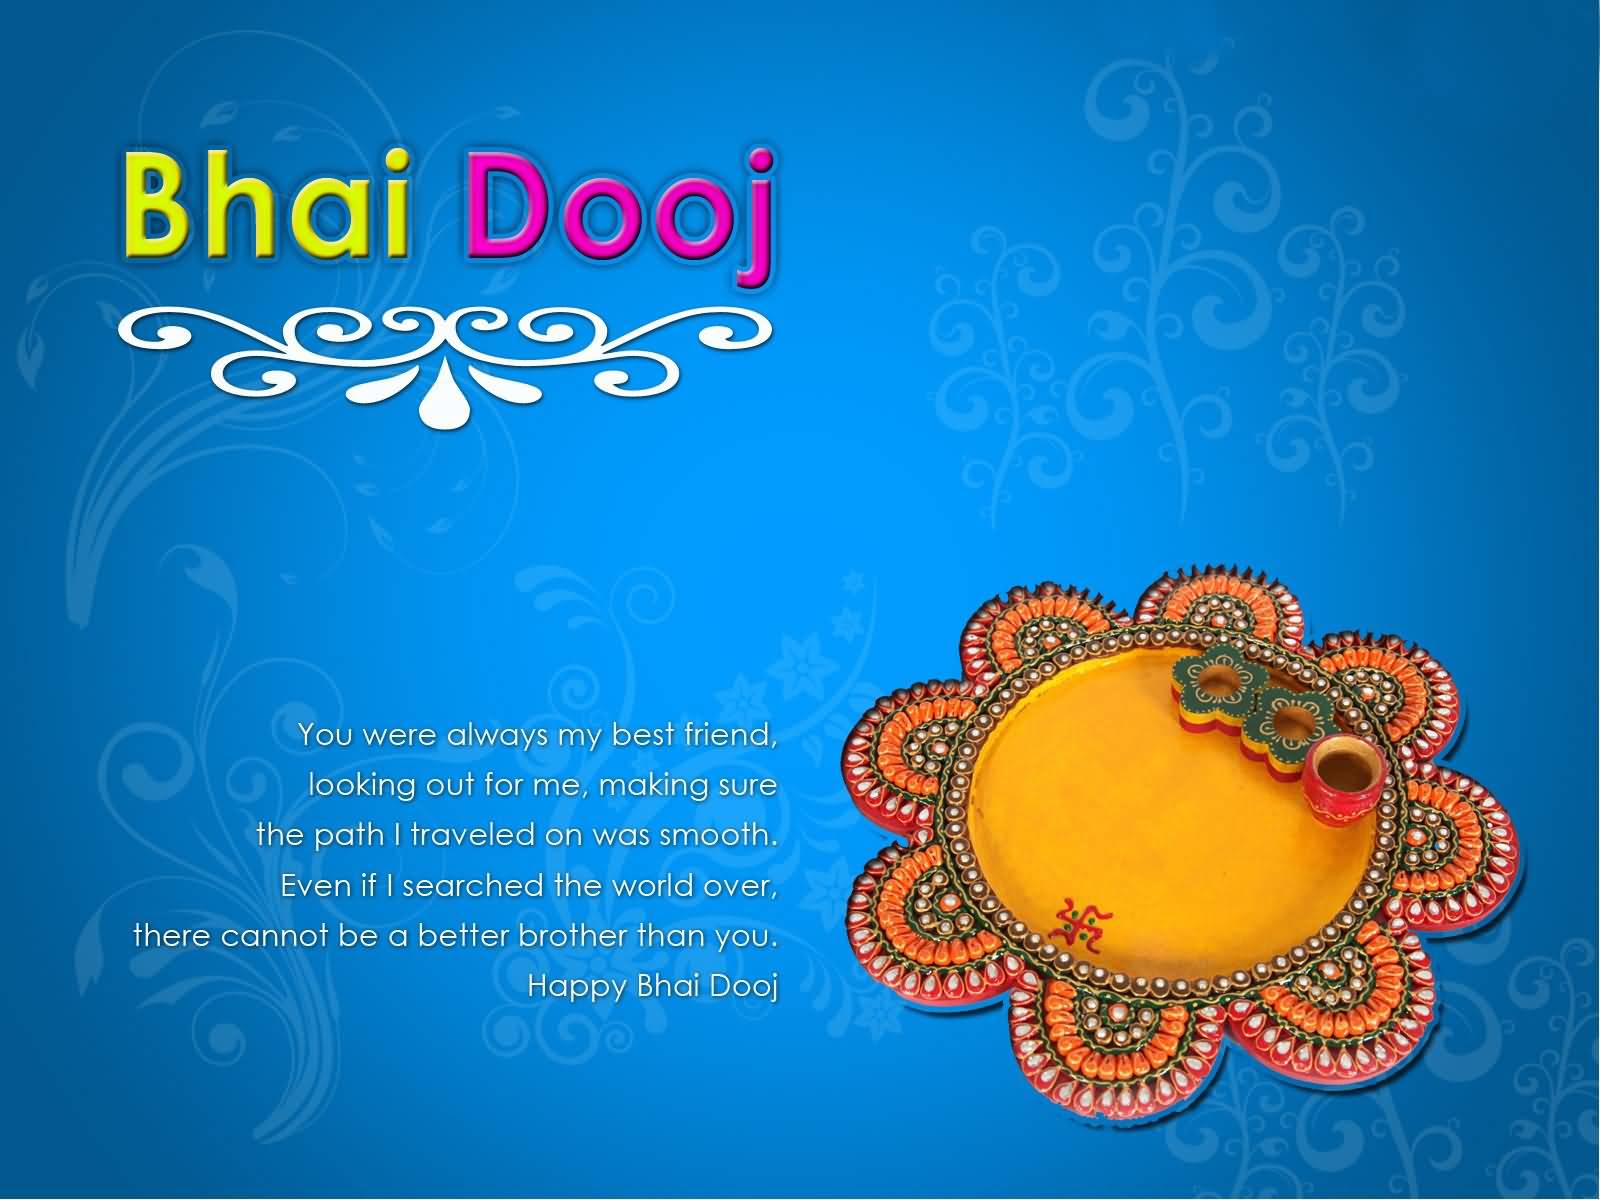 There Cannot Be A Better Brother Than You Happy Bhai Dooj Wallpaper